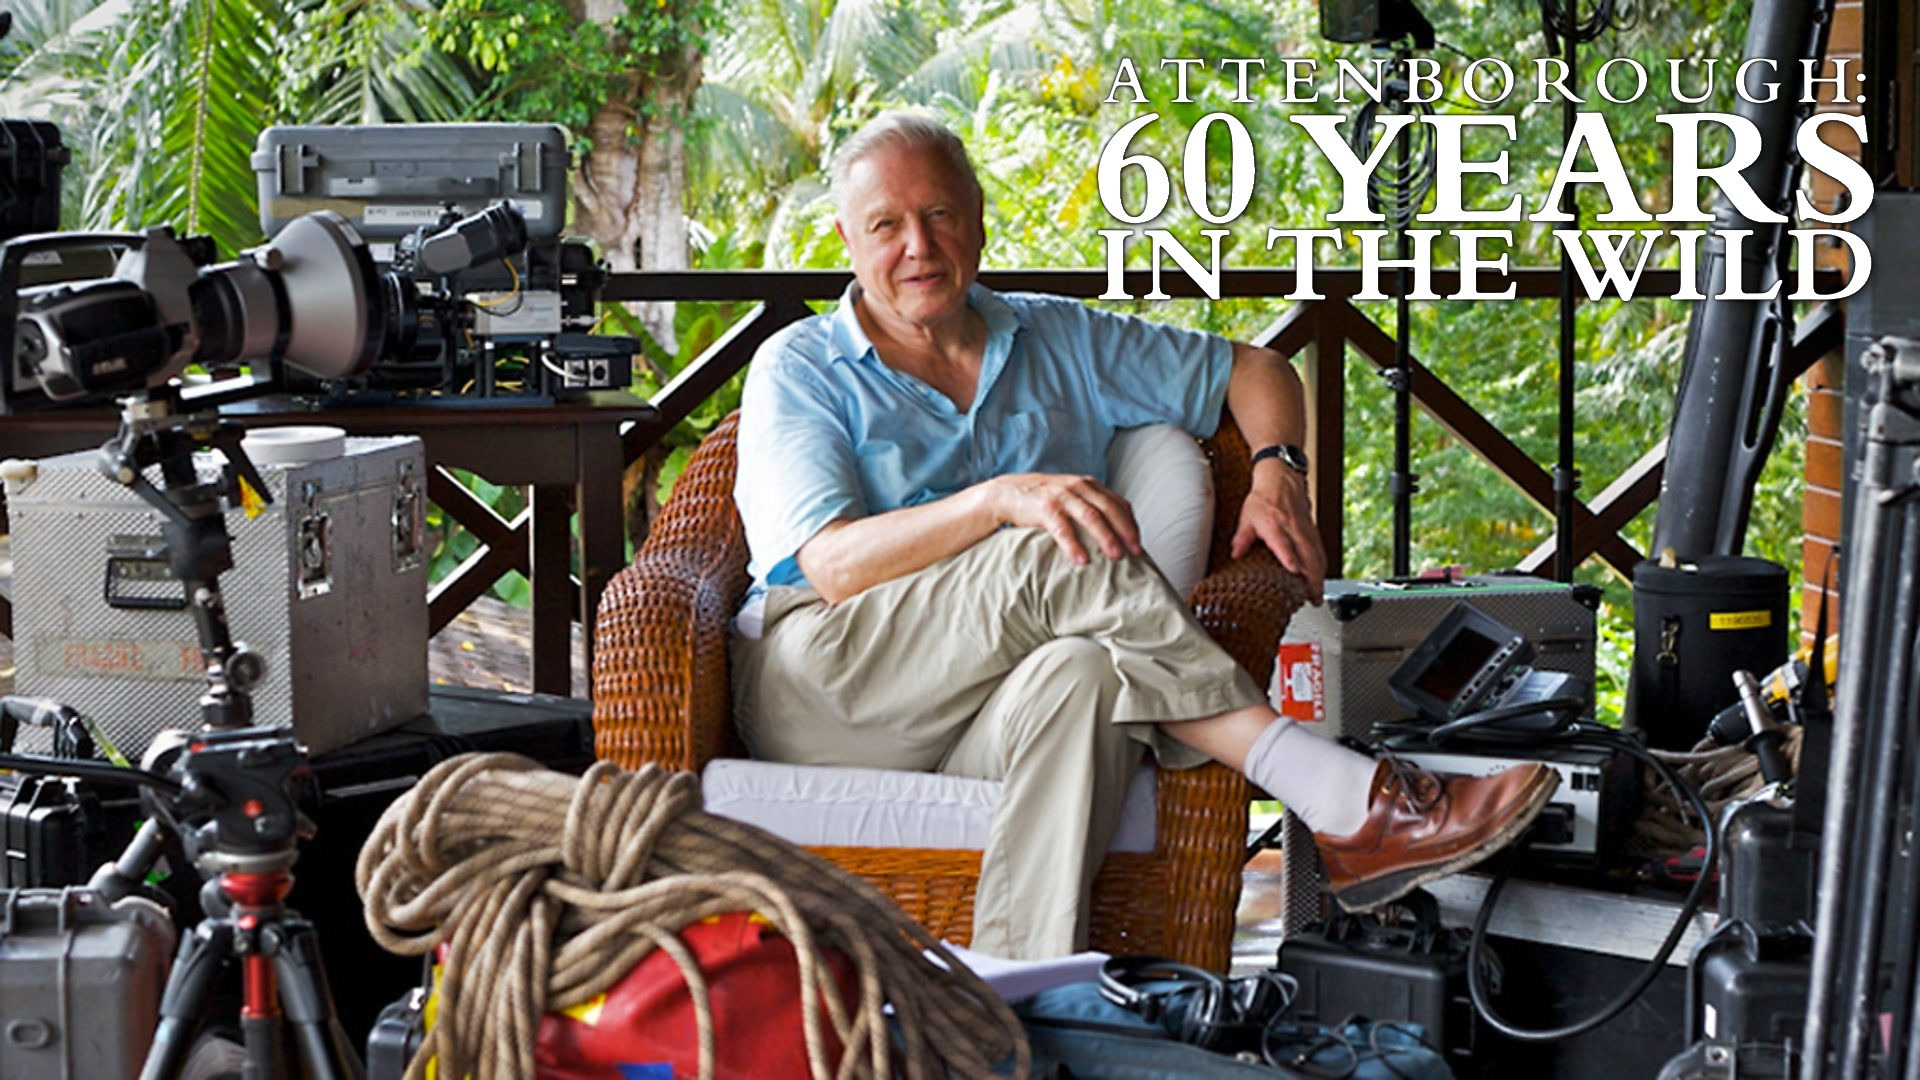 Show Attenborough: 60 Years in the Wild